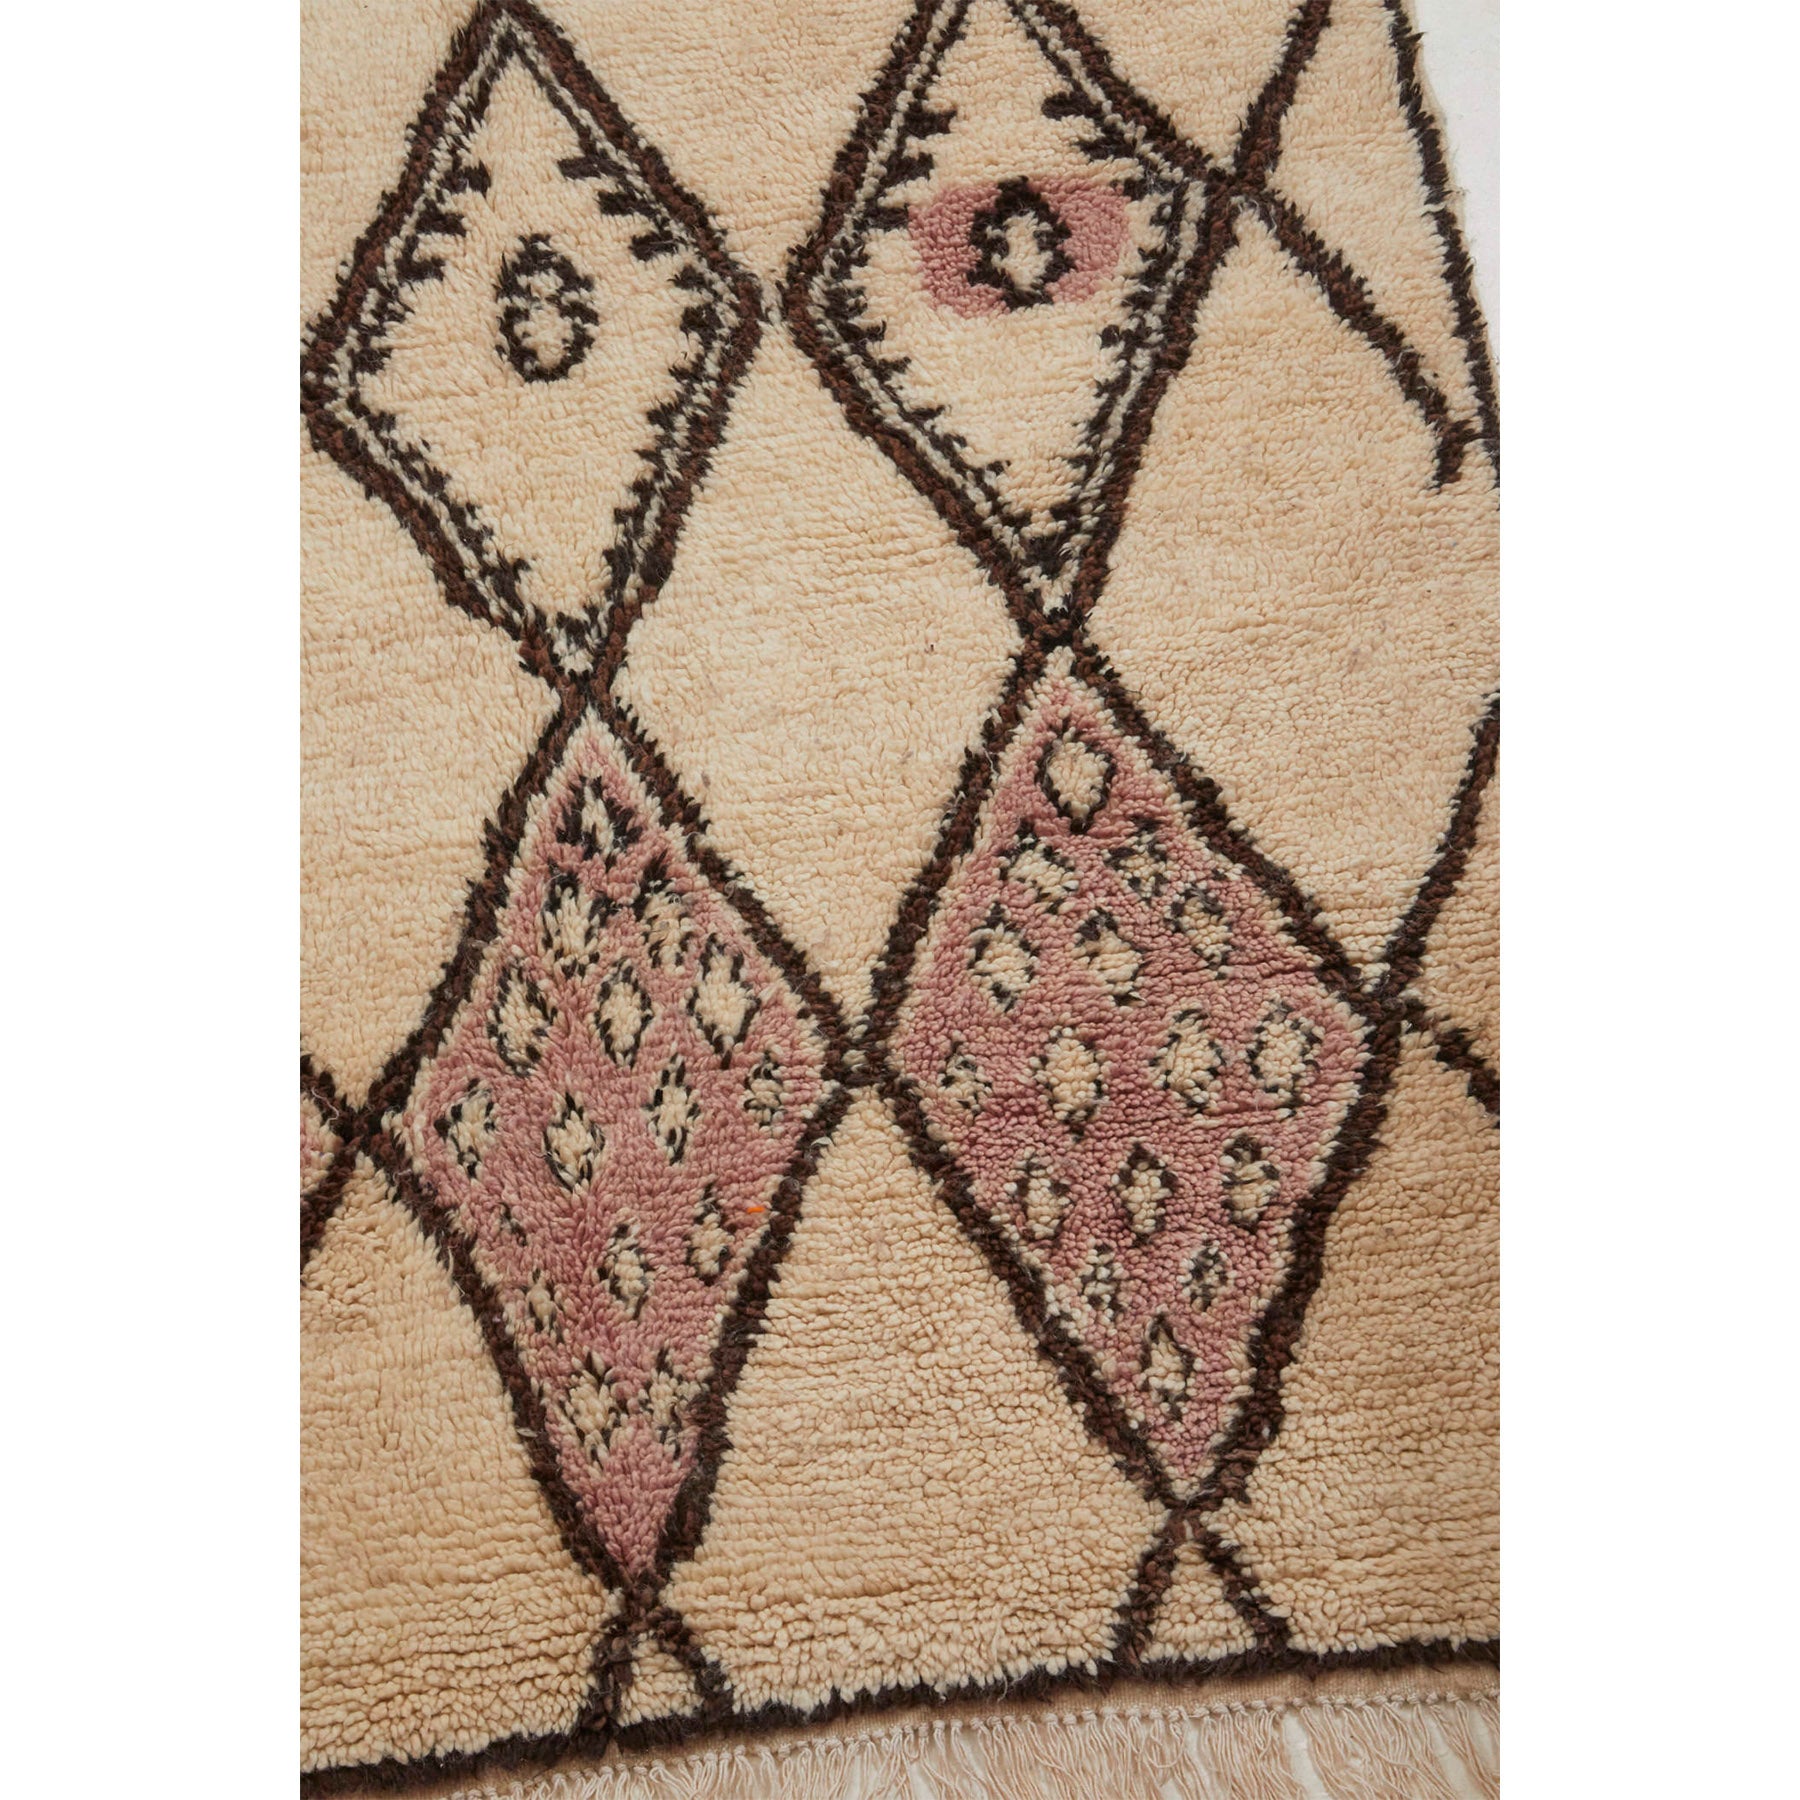 Handwoven wool Moroccan rug in white with traditional diamond pattern - Kantara | Moroccan Rugs